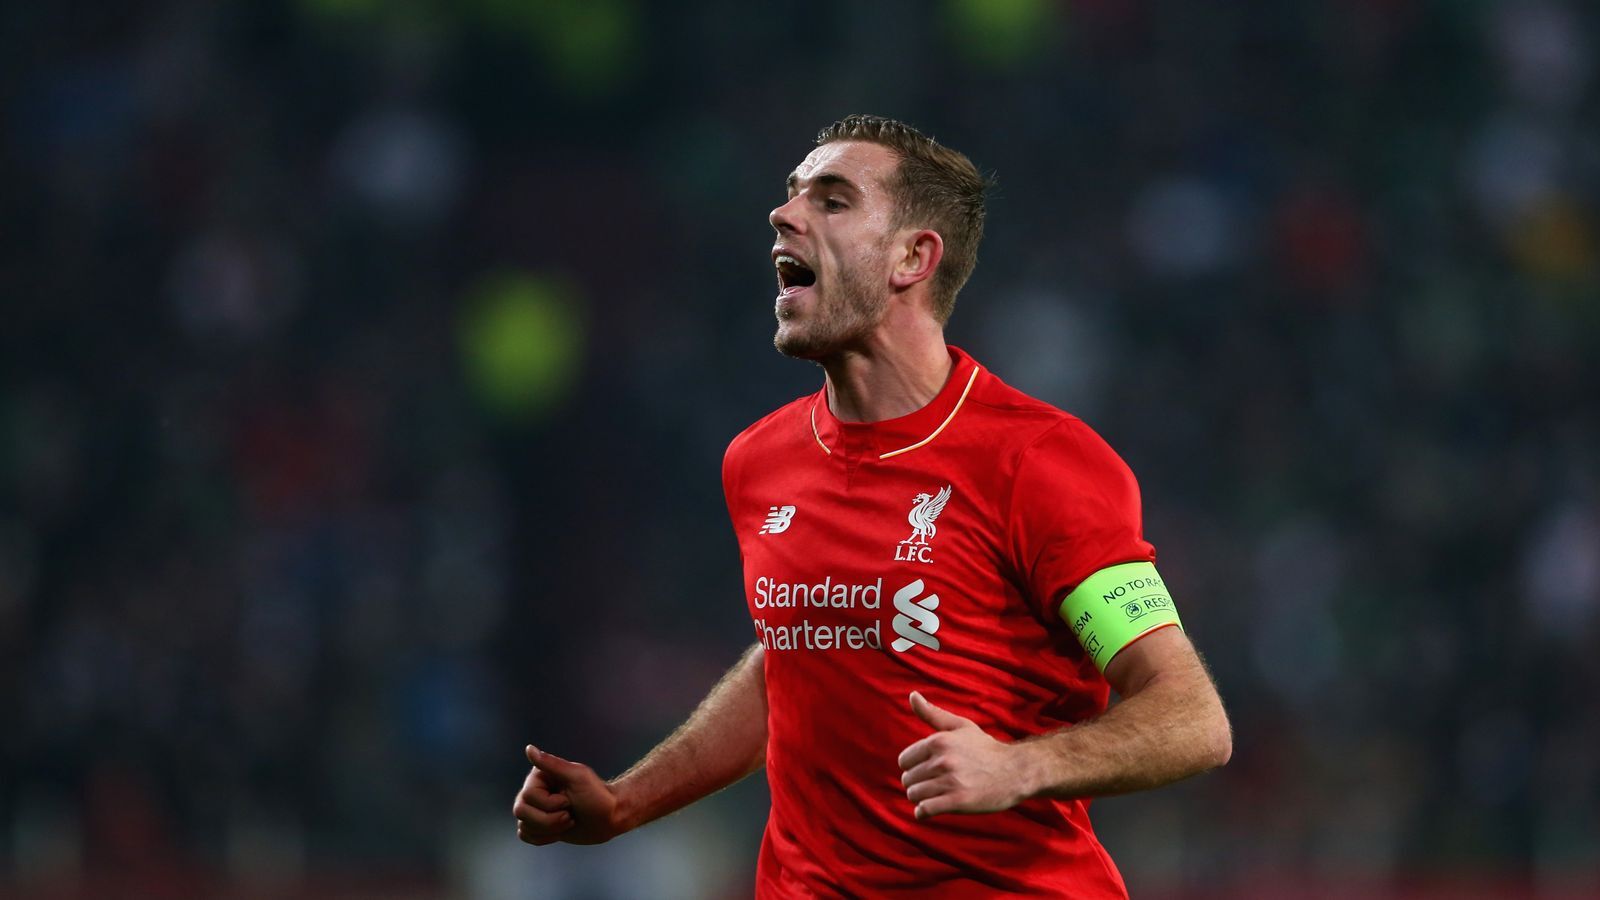 Henderson Says Liverpool is Determined to Win Trophies Now